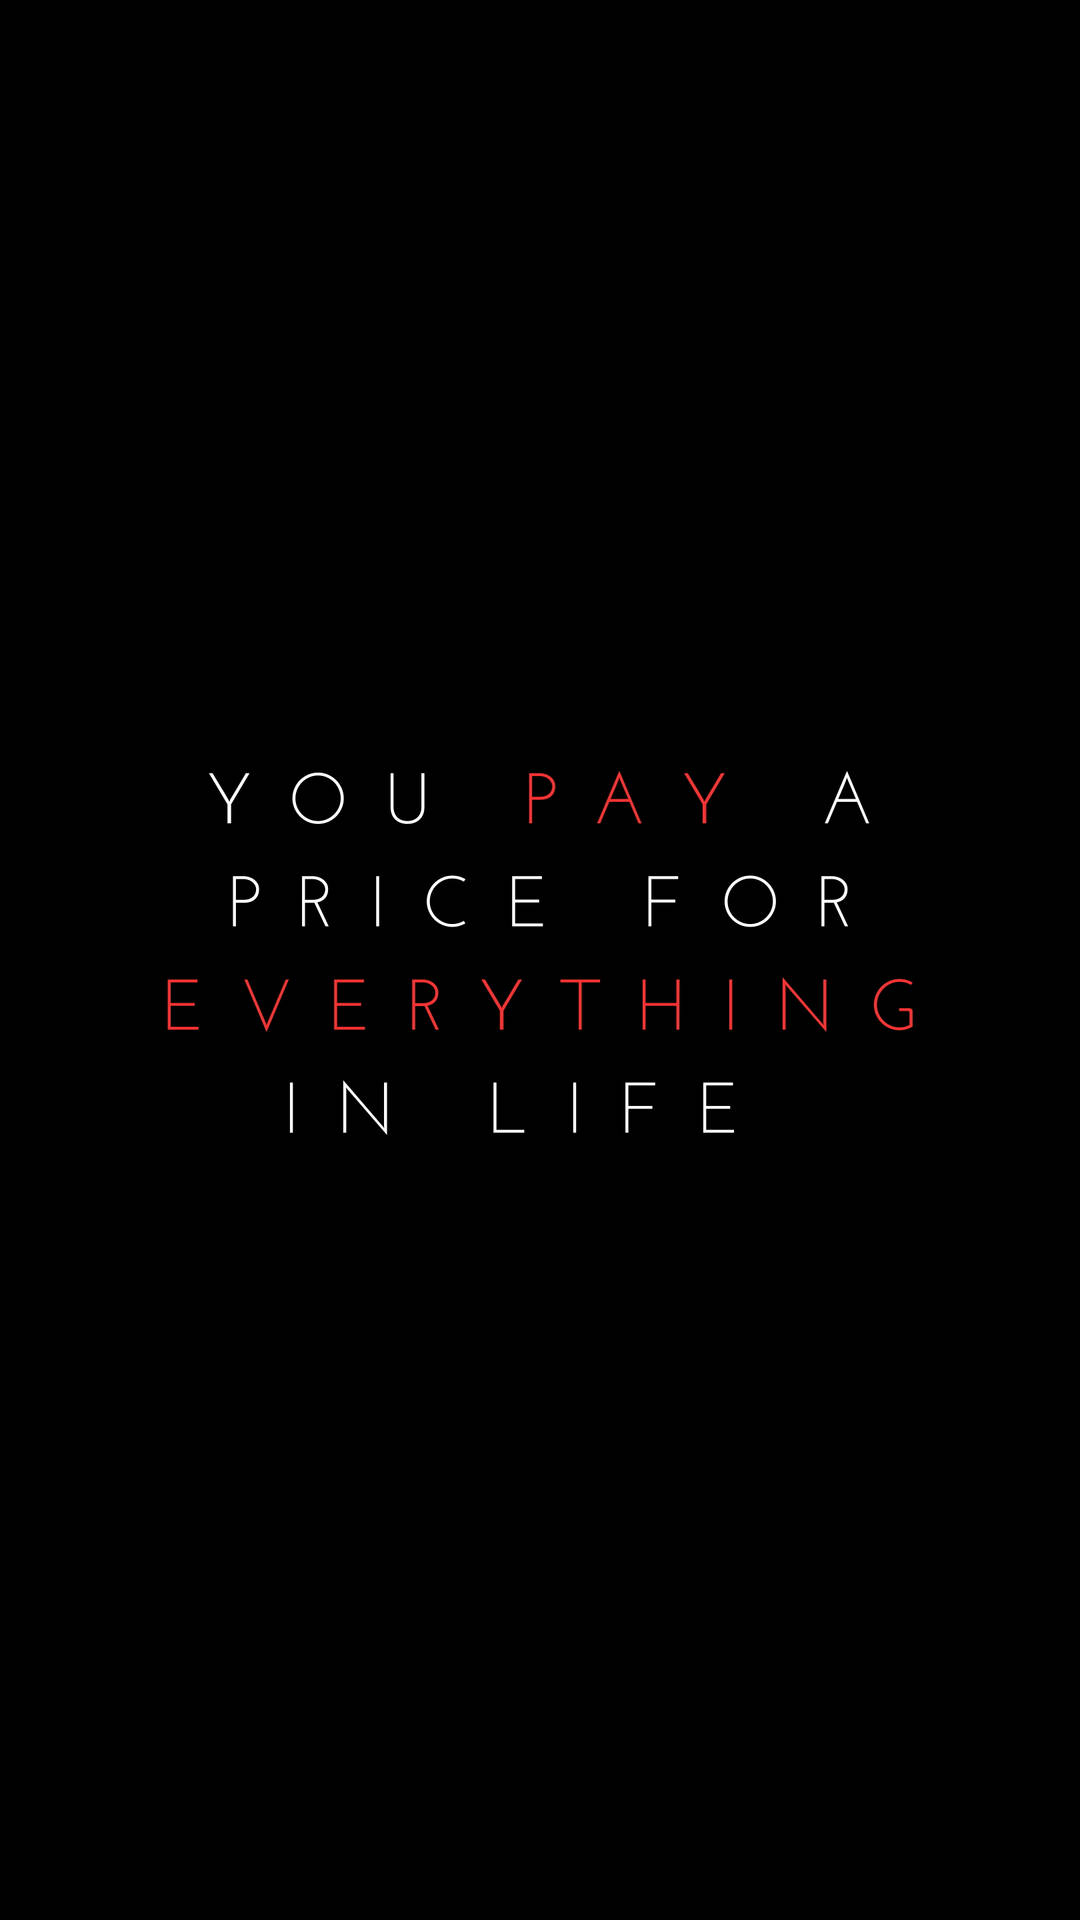 Pay A Price In Life Quotes Wallpaper